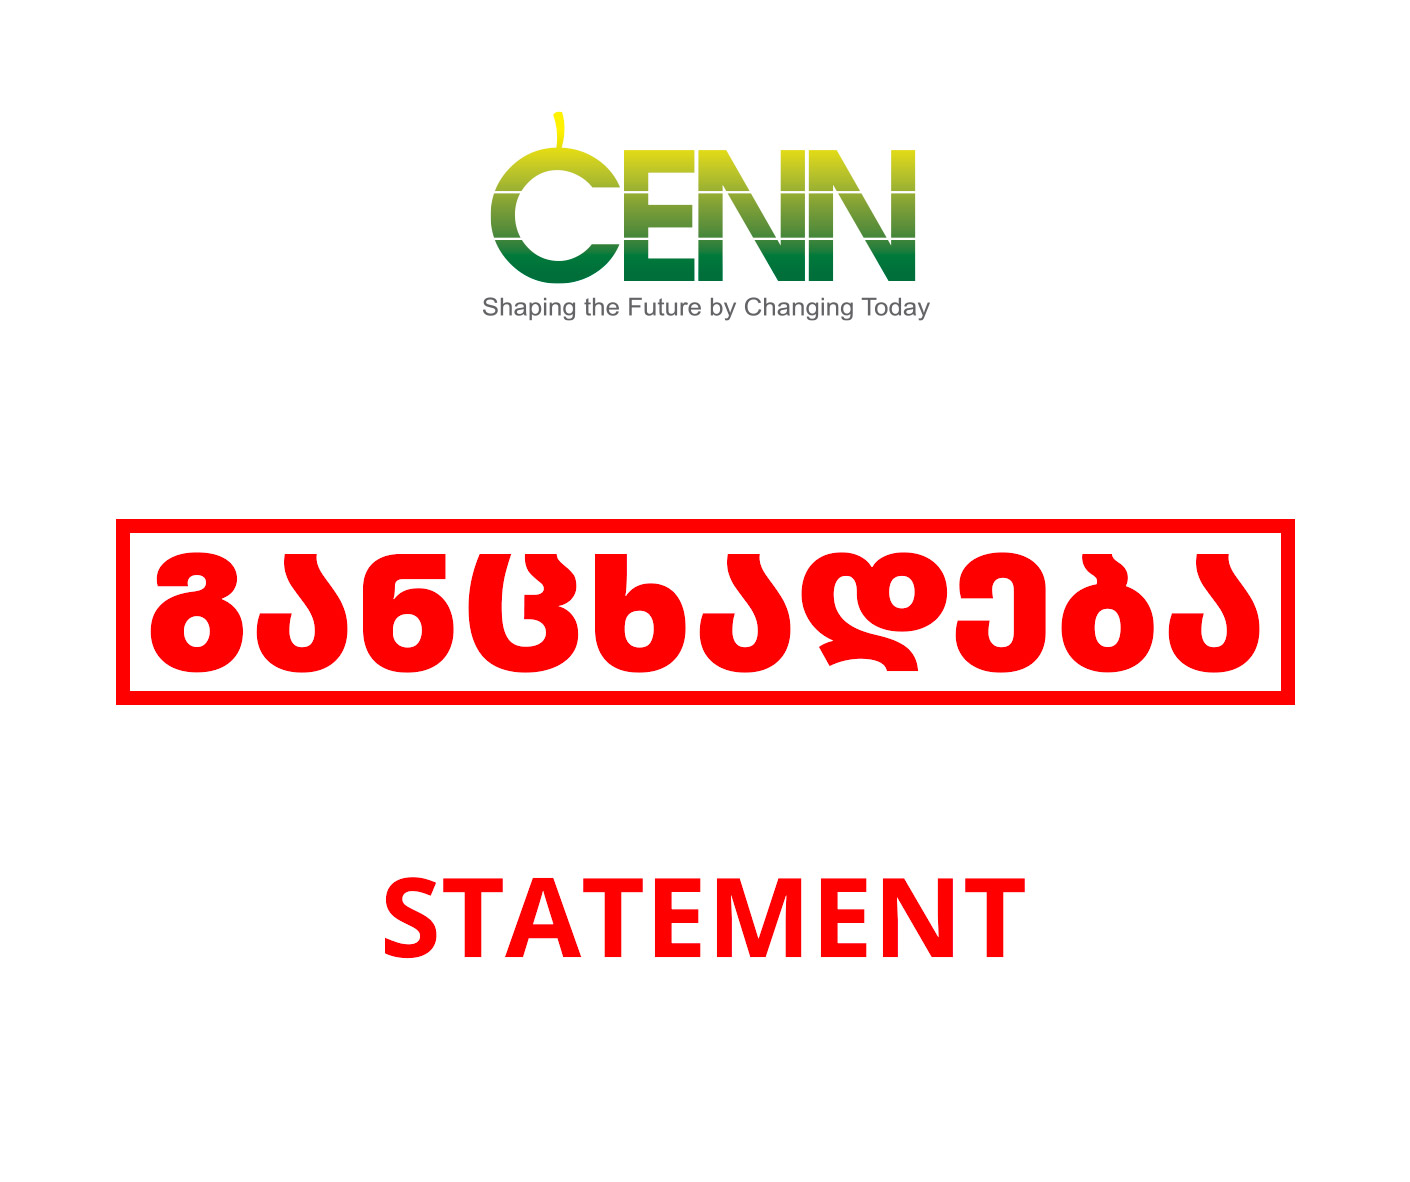  CENN releases statement on the draft laws of “Foreign Transparency Influence”